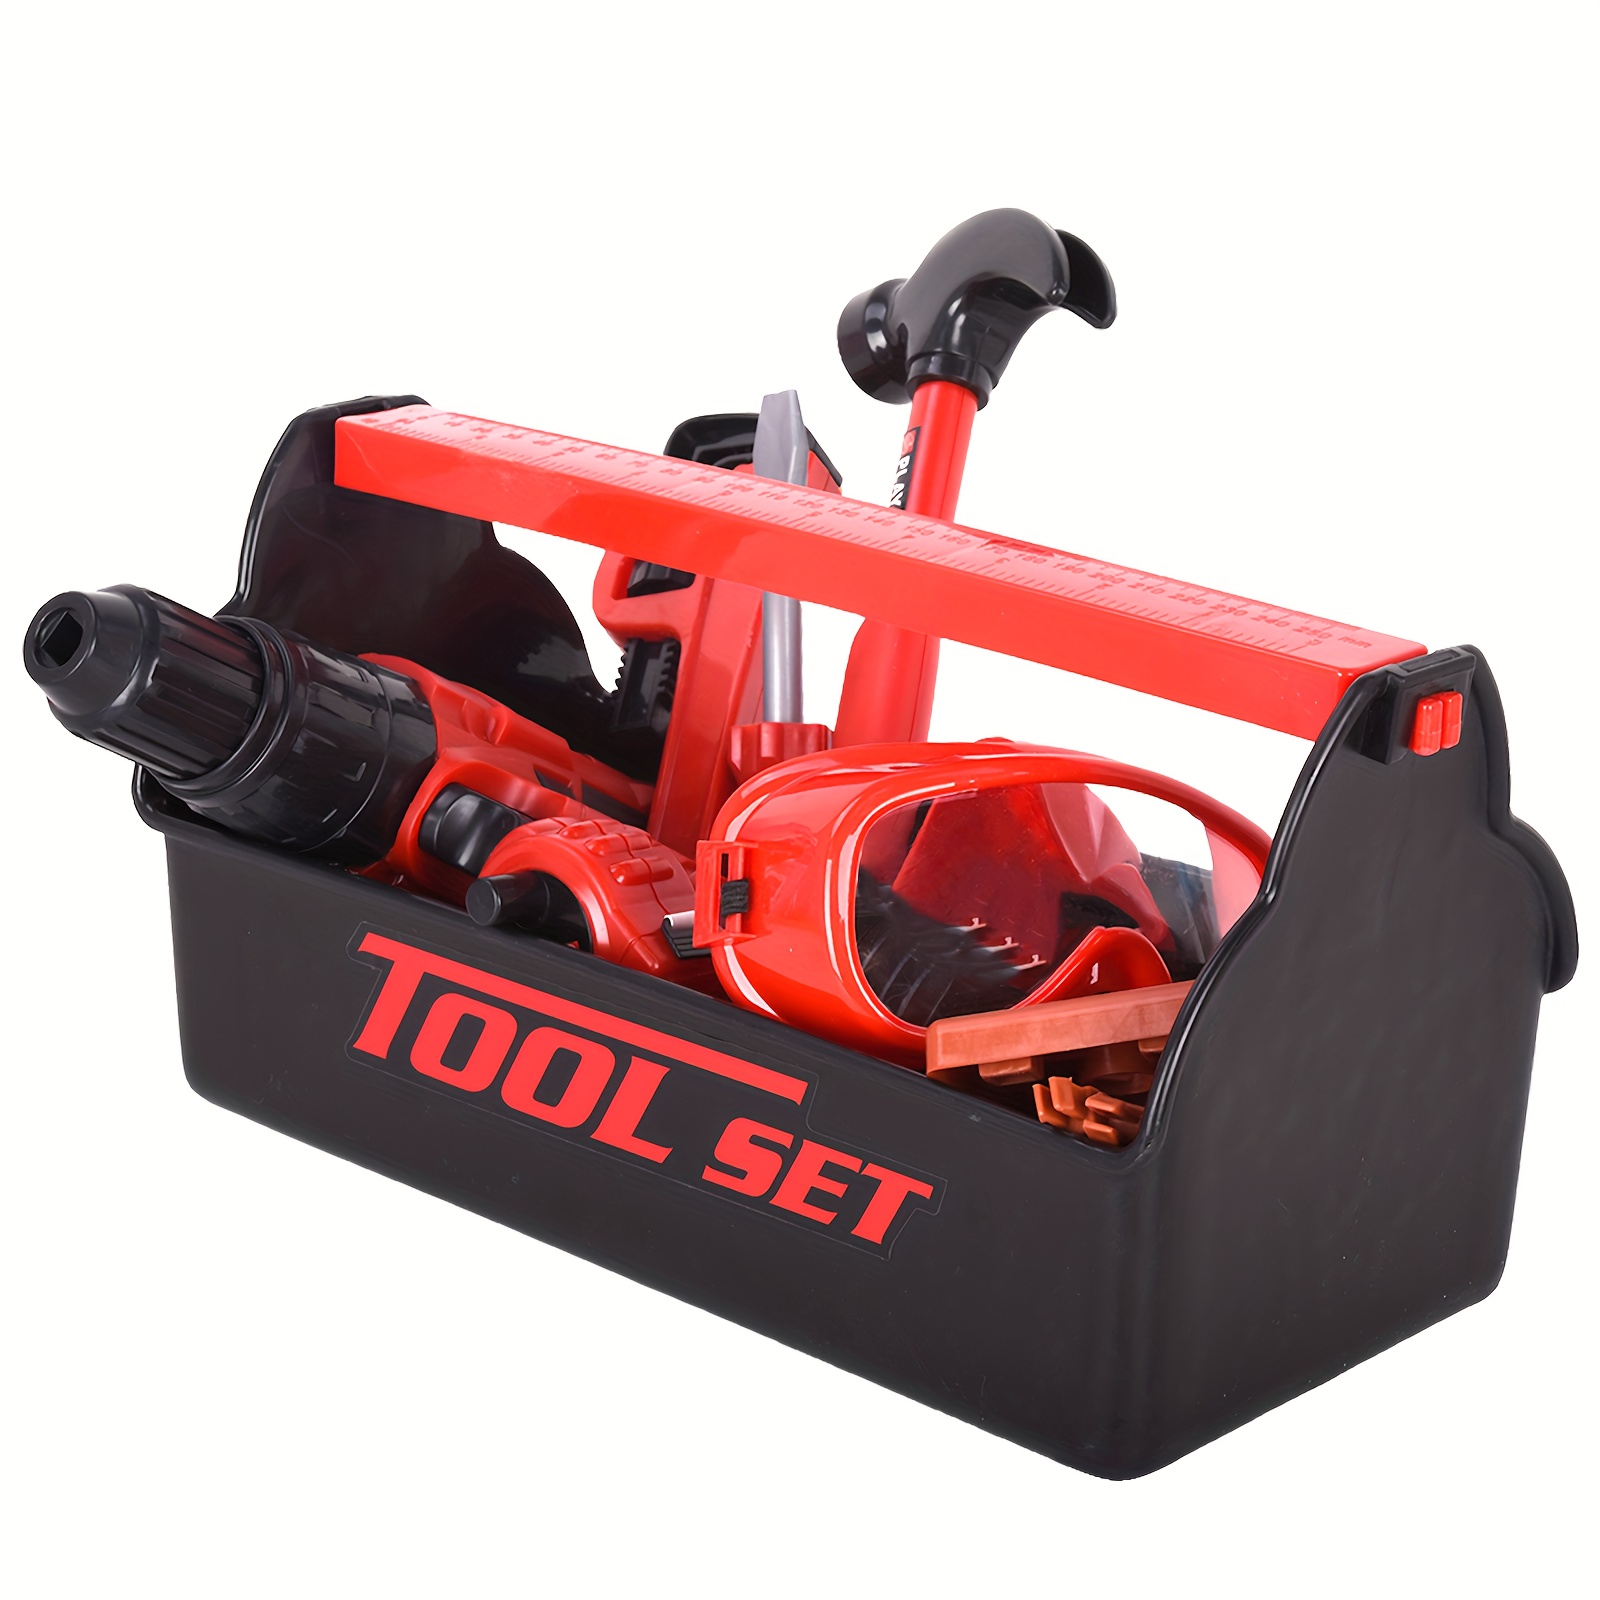 STEAM Life Kids Toddler Tool Set - Toy Tool Set with Electric Toy Drill,  Toddler Tool Box, Toy Hammer, Red Manual Drill Tool Play Set - Pretend Play